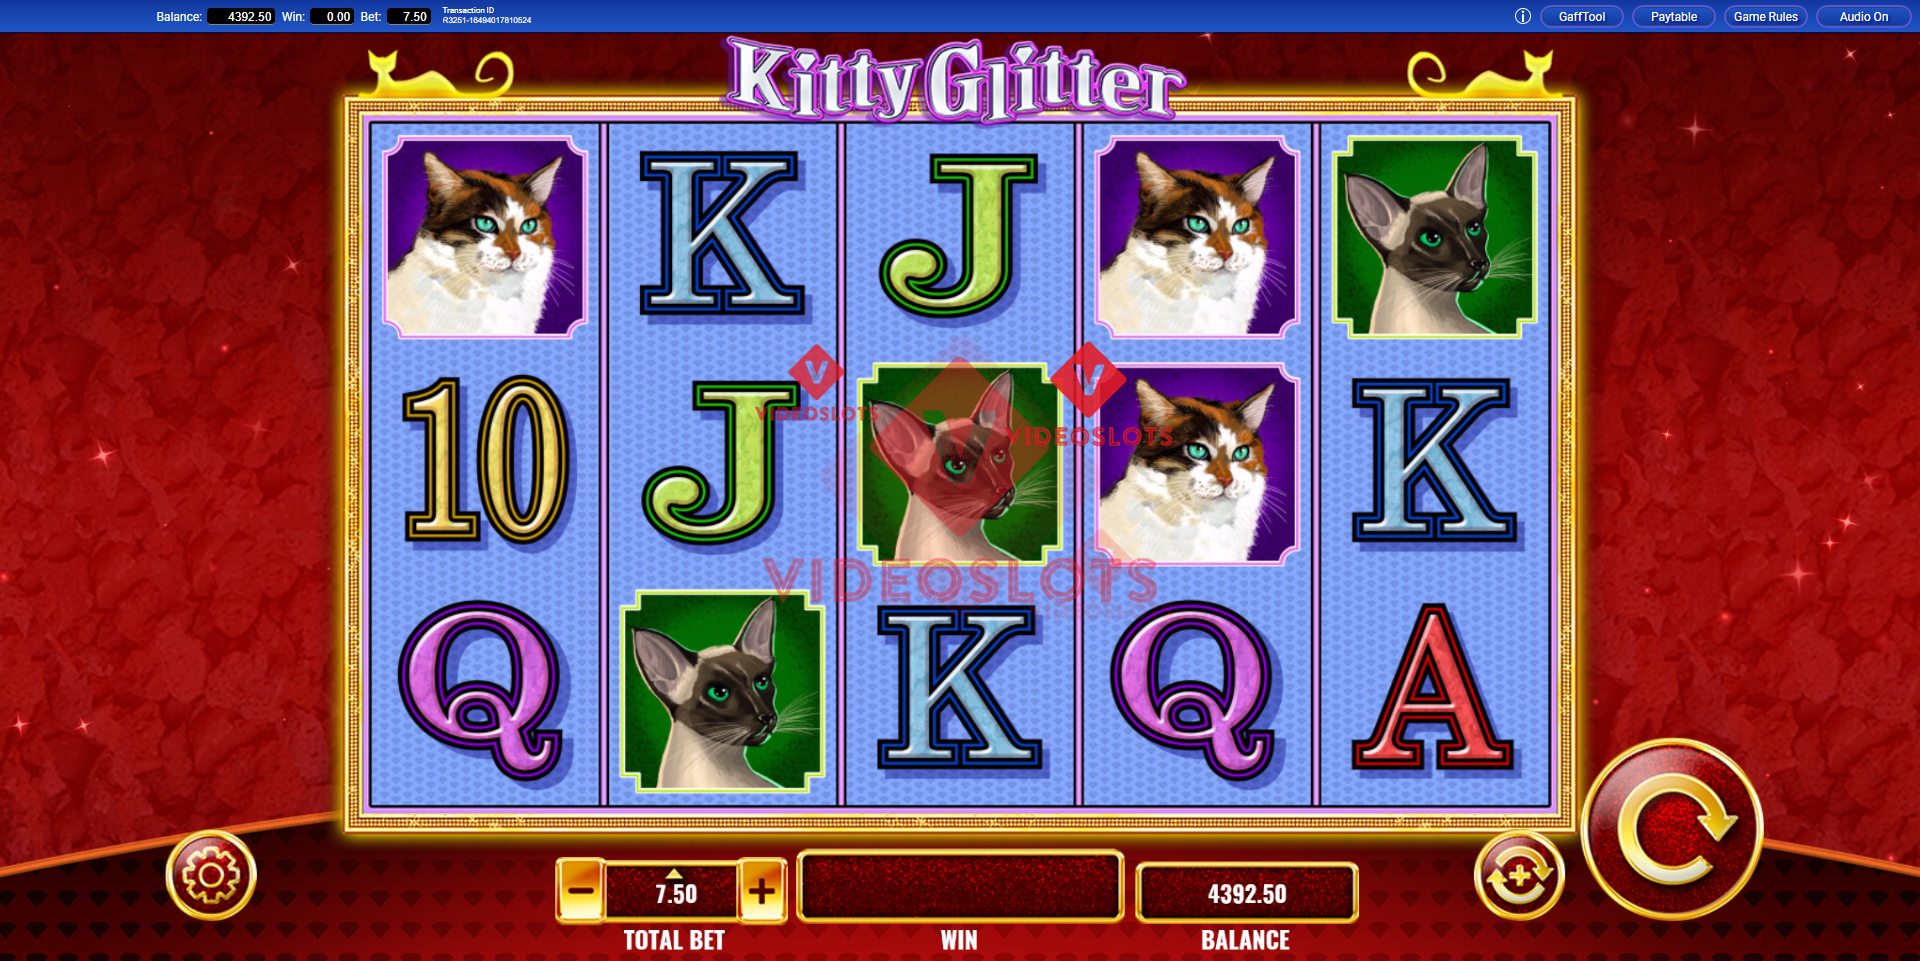 Base Game for Kitty Glitter slot from IGT